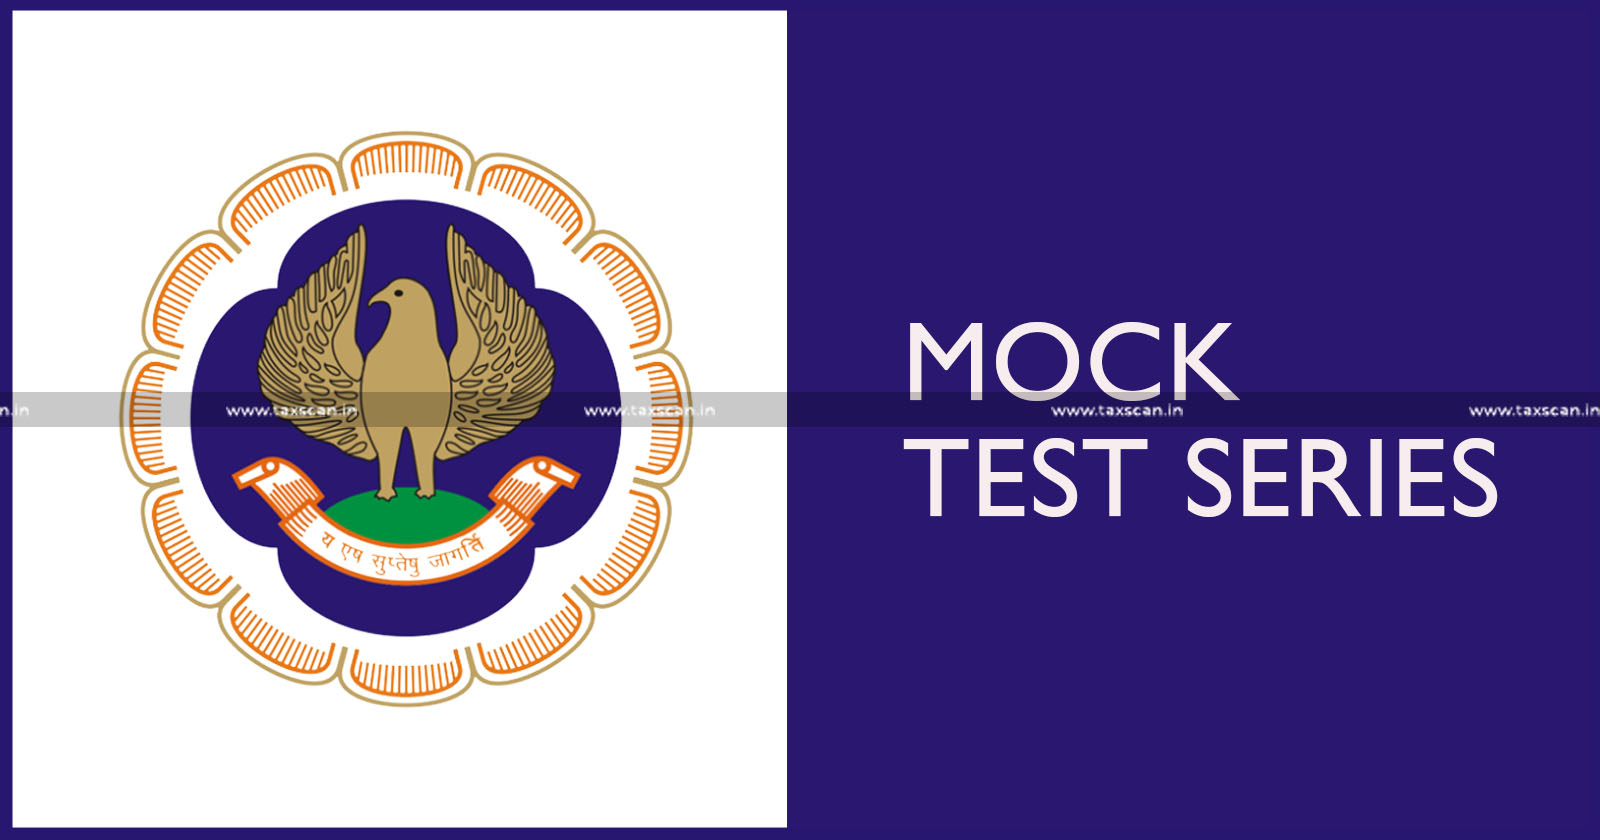 ICAI - CA Final - CA Inter - Mock Tests for CA Final and Inter - TAXSCAN